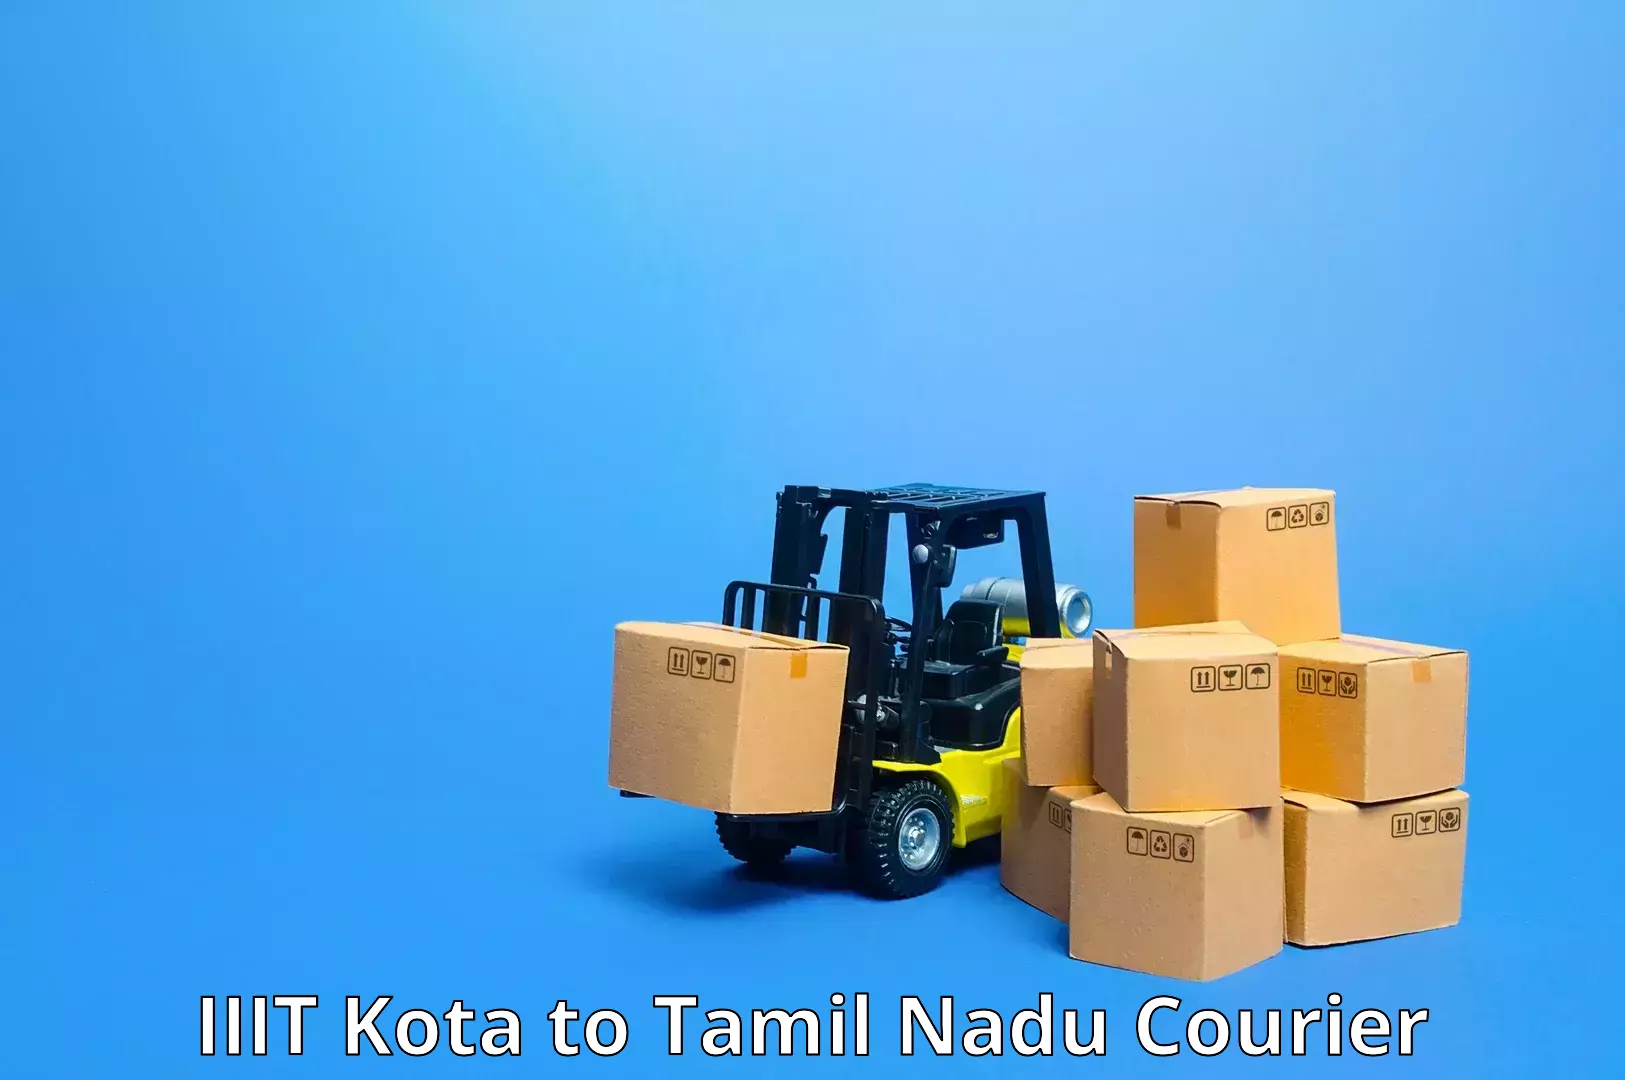 Customized shipping options IIIT Kota to Trichy